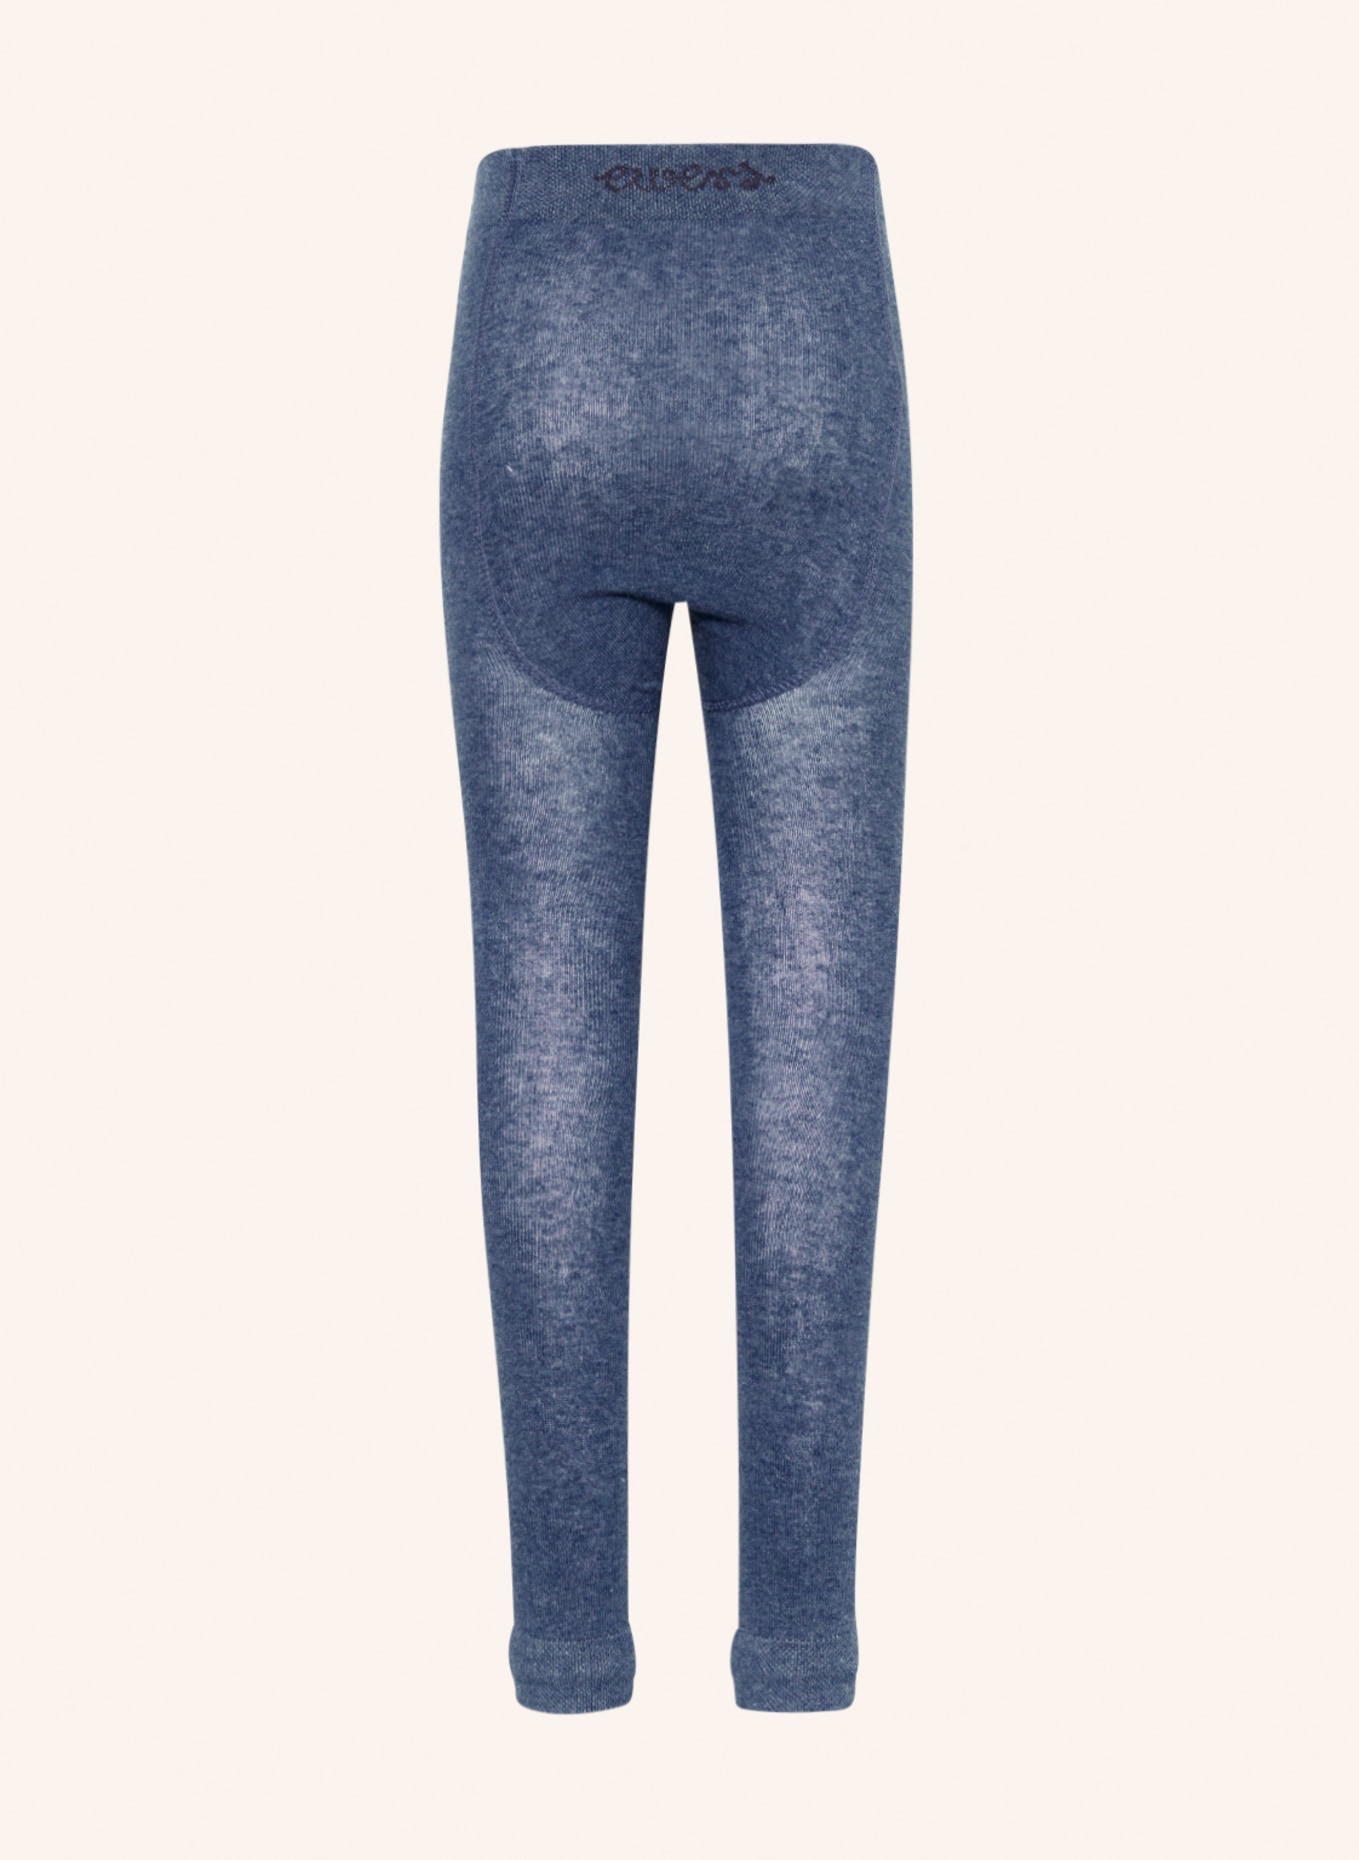 ewers COLLECTION 2-pack leggings, Color: BLUE/ DARK GRAY (Image 2)